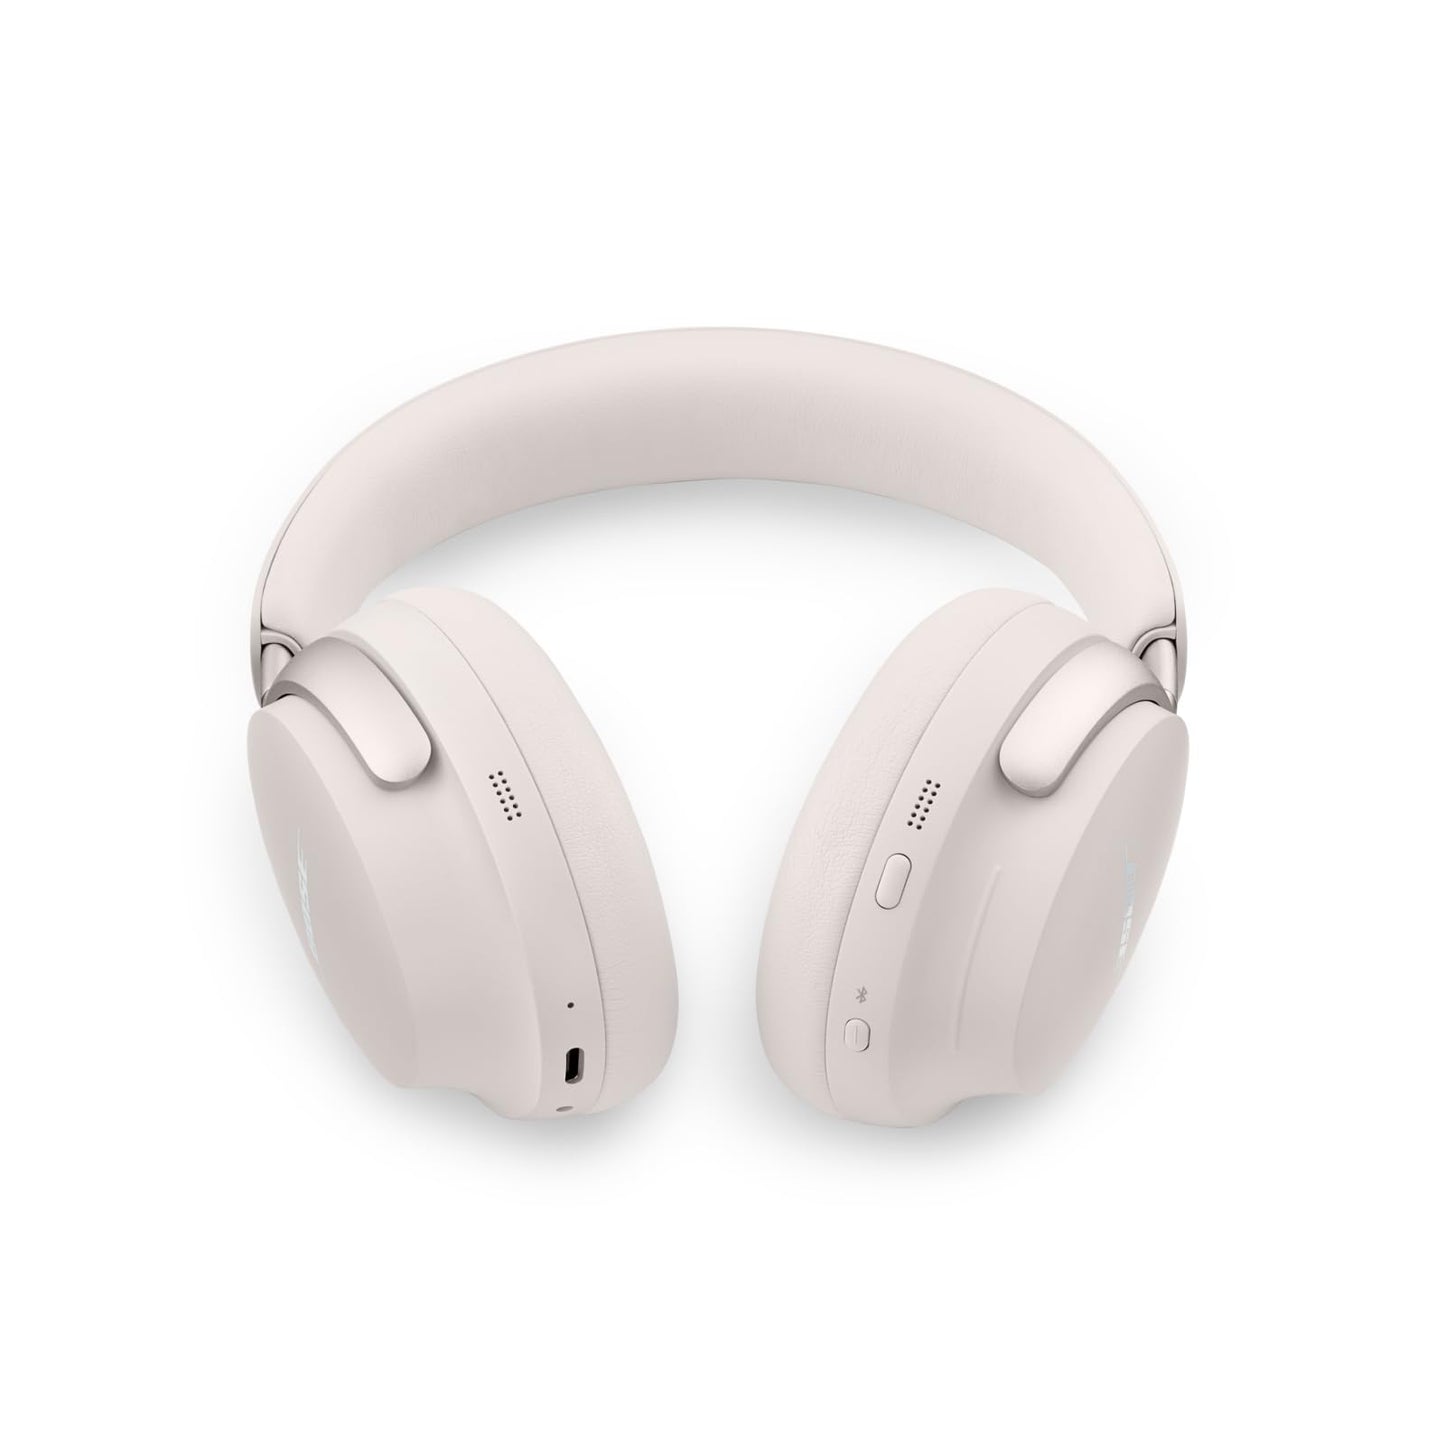 Bose NEW QuietComfort Ultra Wireless Noise Cancelling Headphones with Spatial Audio, Over-the-Ear Headphones with Mic, Up to 24 Hours of Battery Life, White Smoke